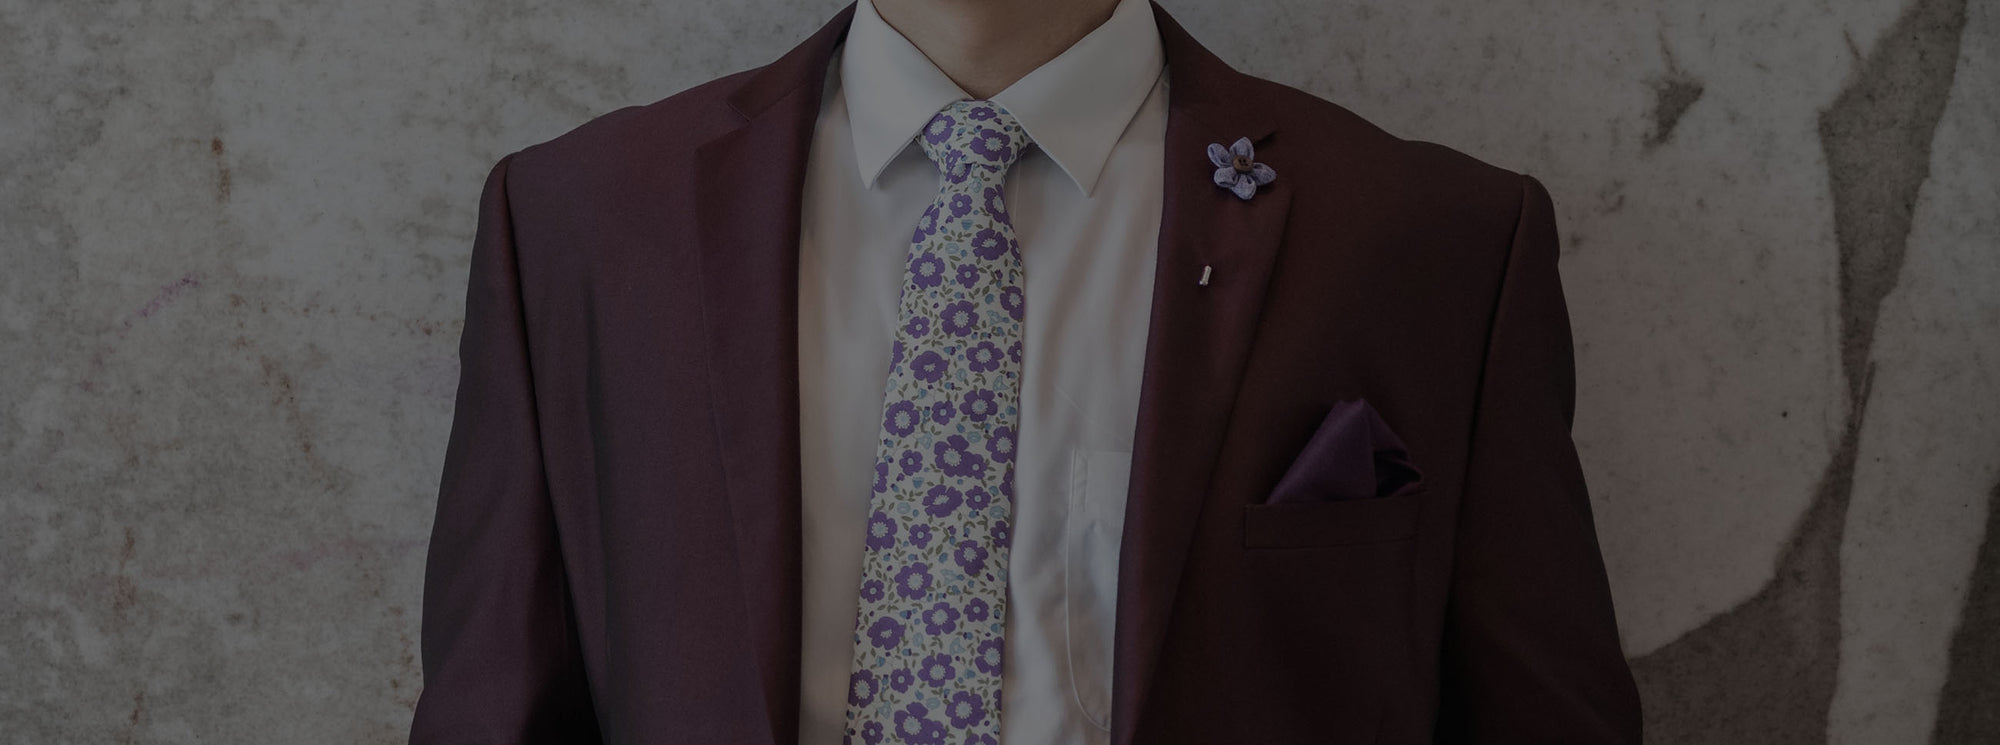 Man wearing burgundy suit and complementing lavender floral tie